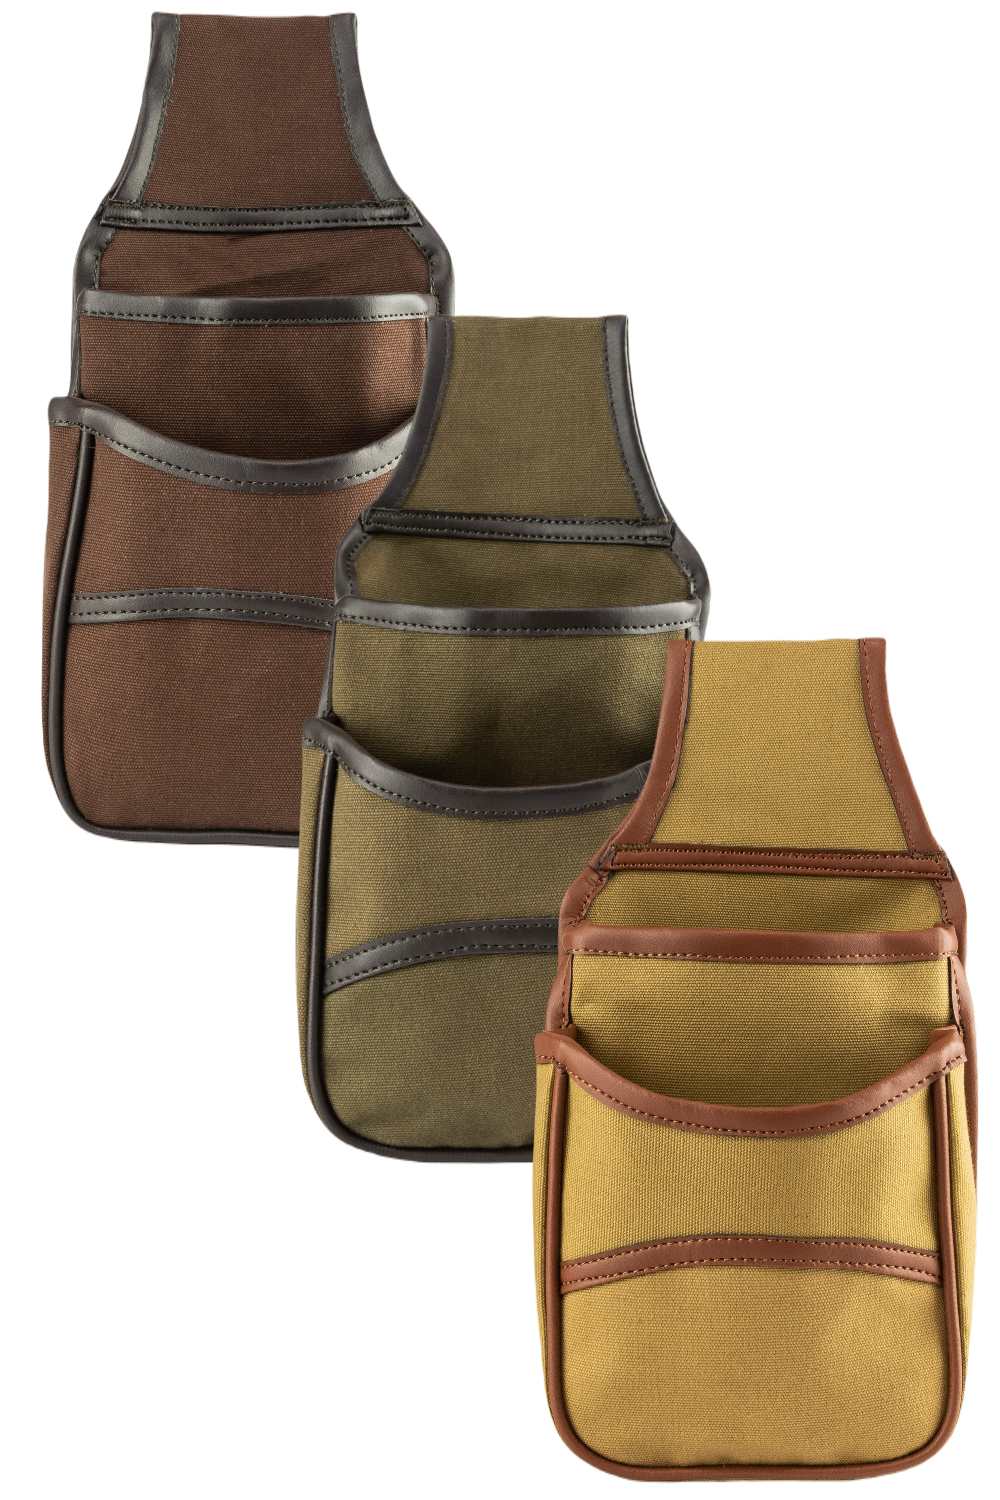 Jack Pyke Canvas Cartridge Pouch in Brown, Green and Fawn  